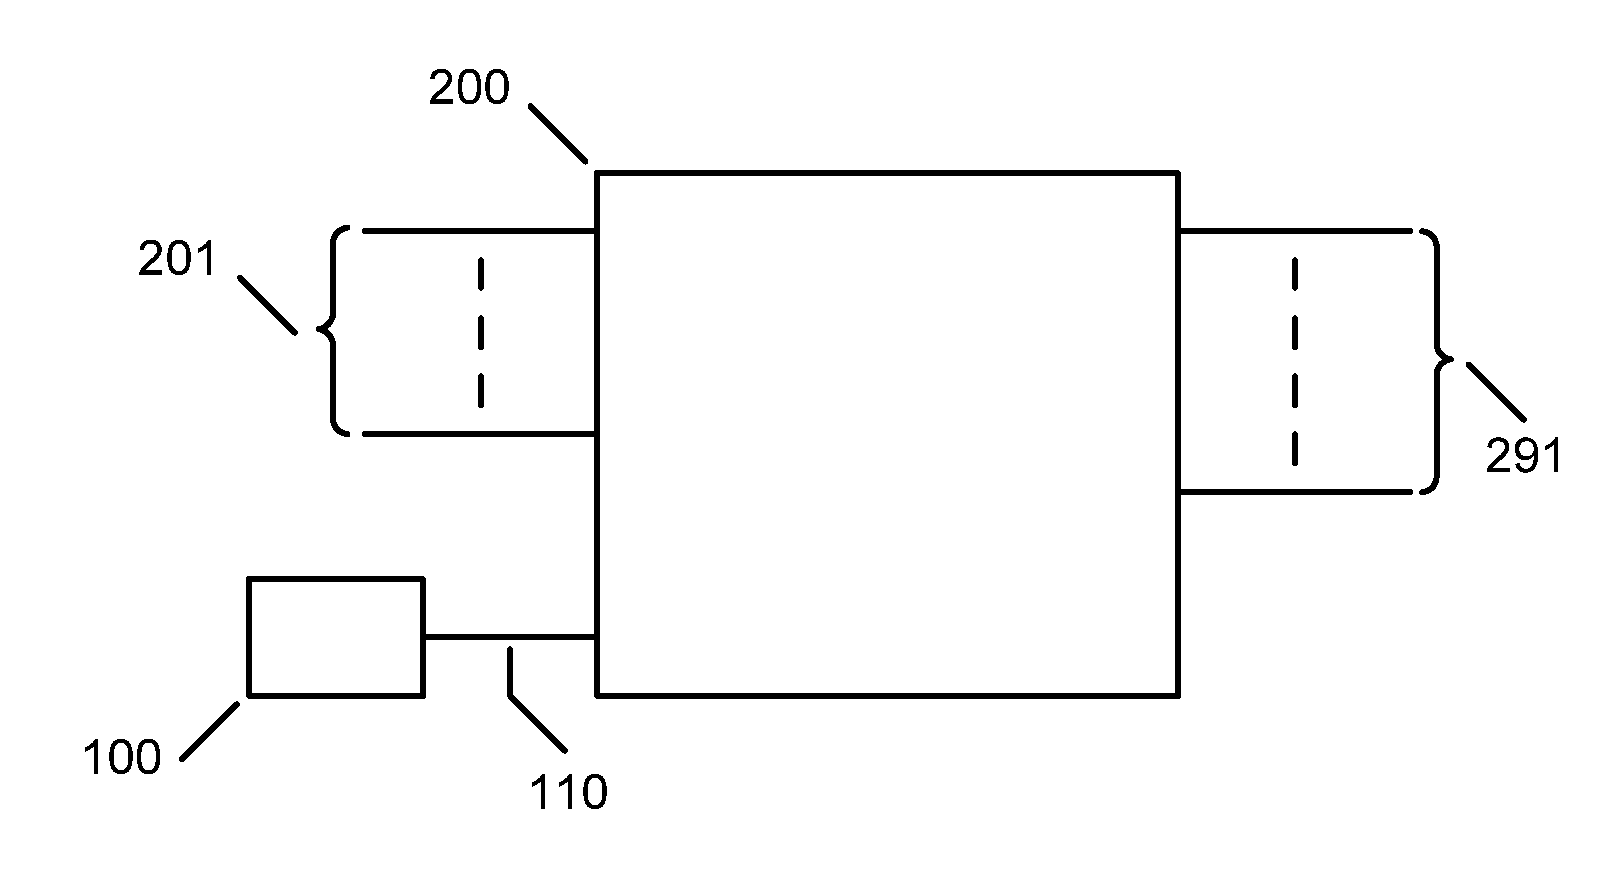 Logic system with resistance to side-channel attack by exhibiting a closed clock-data eye diagram